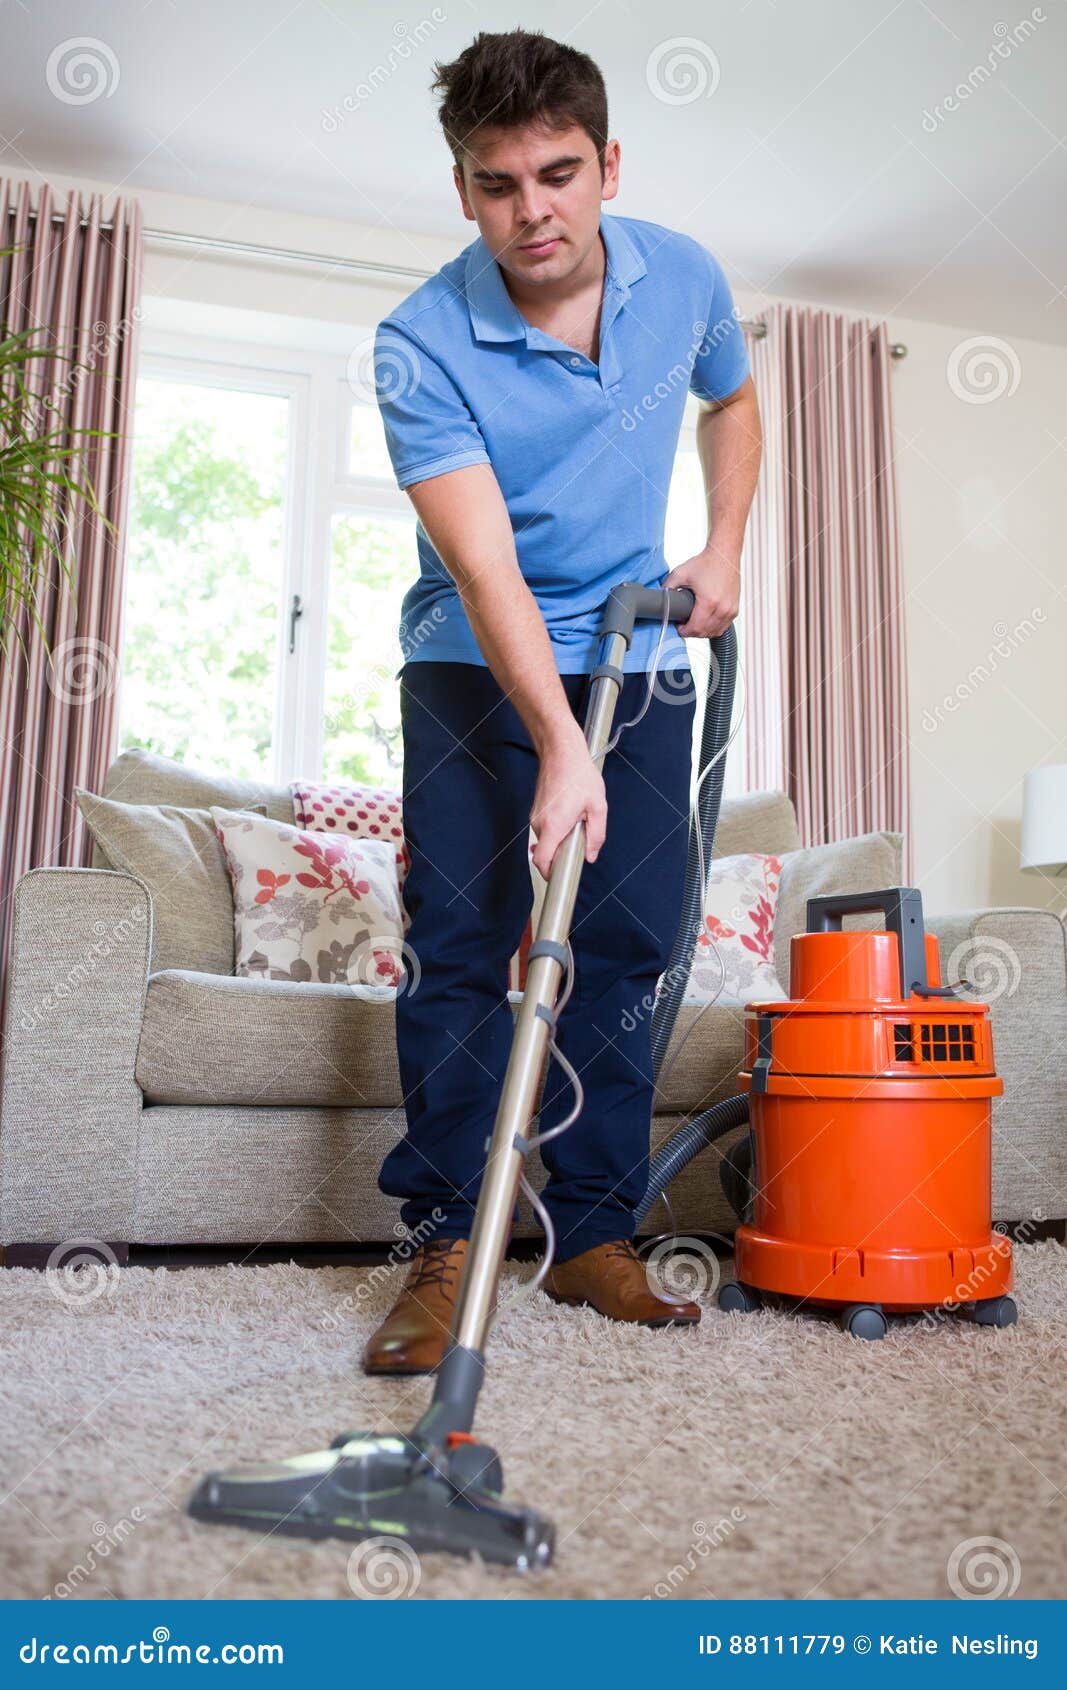 young man professionally cleaning carpets